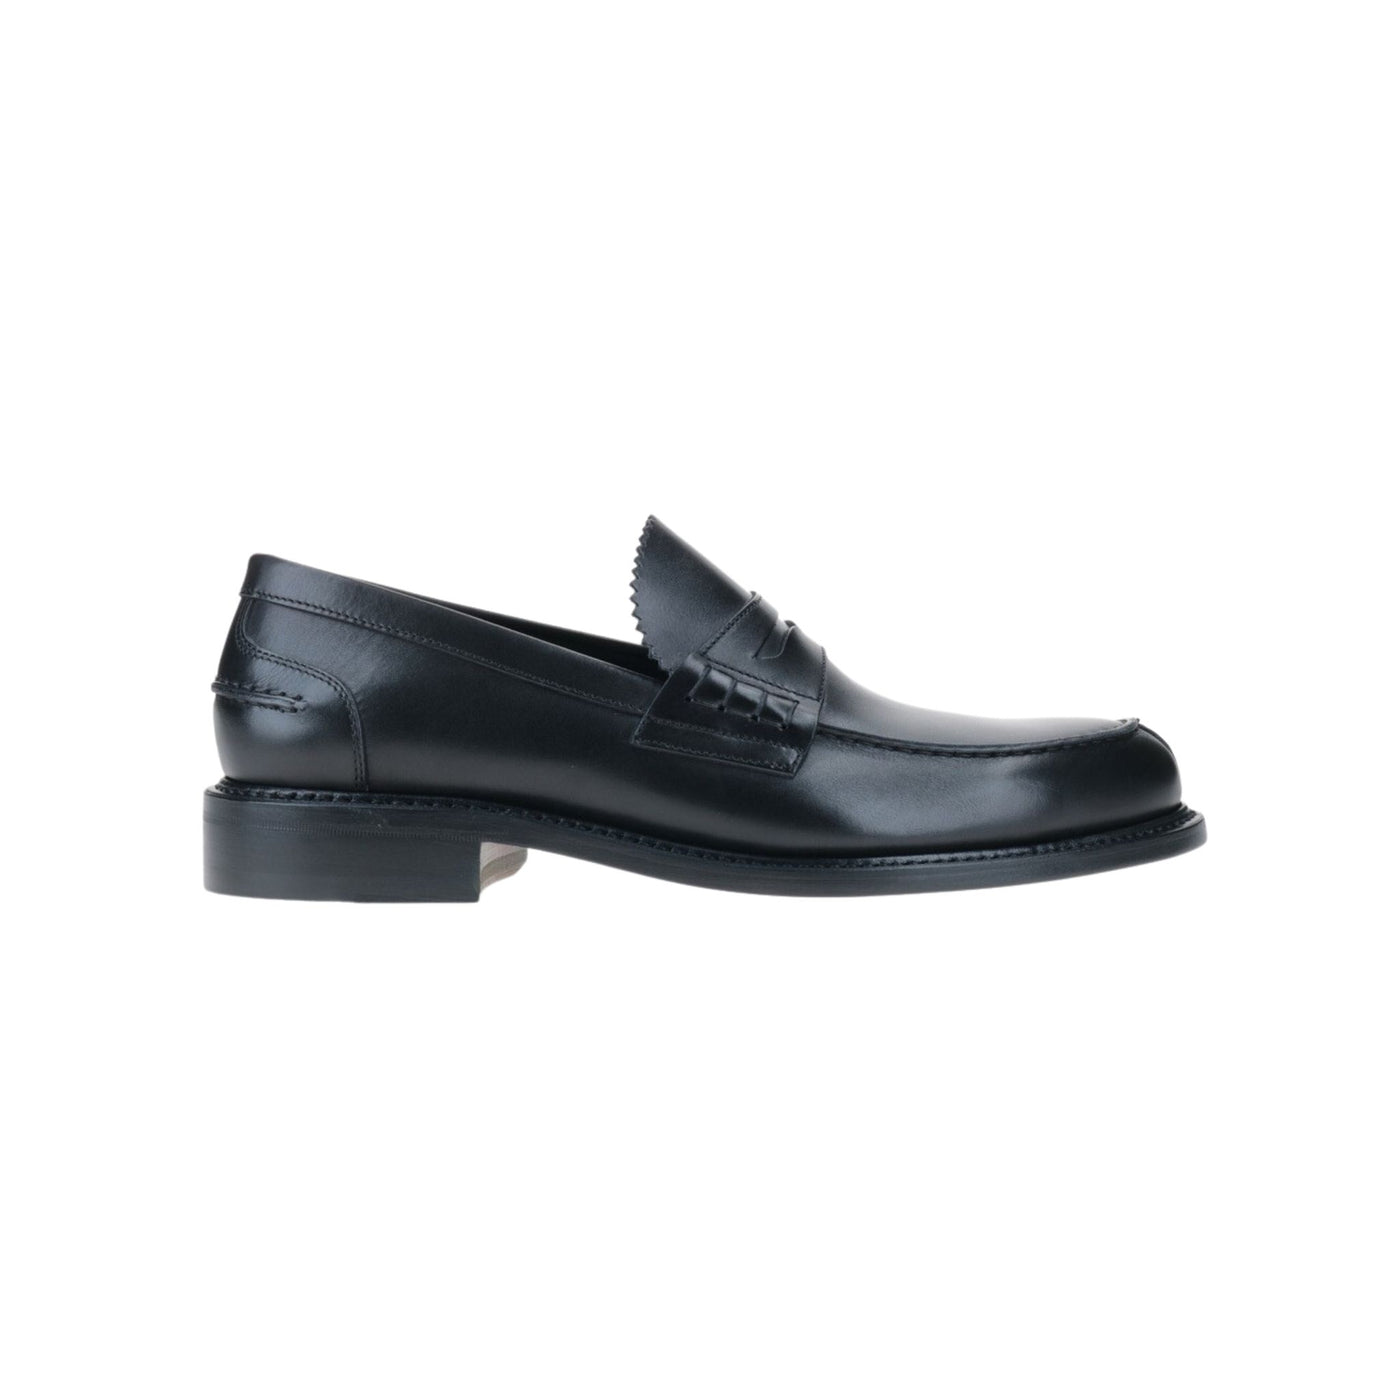 Men's moccasins in shiny leather